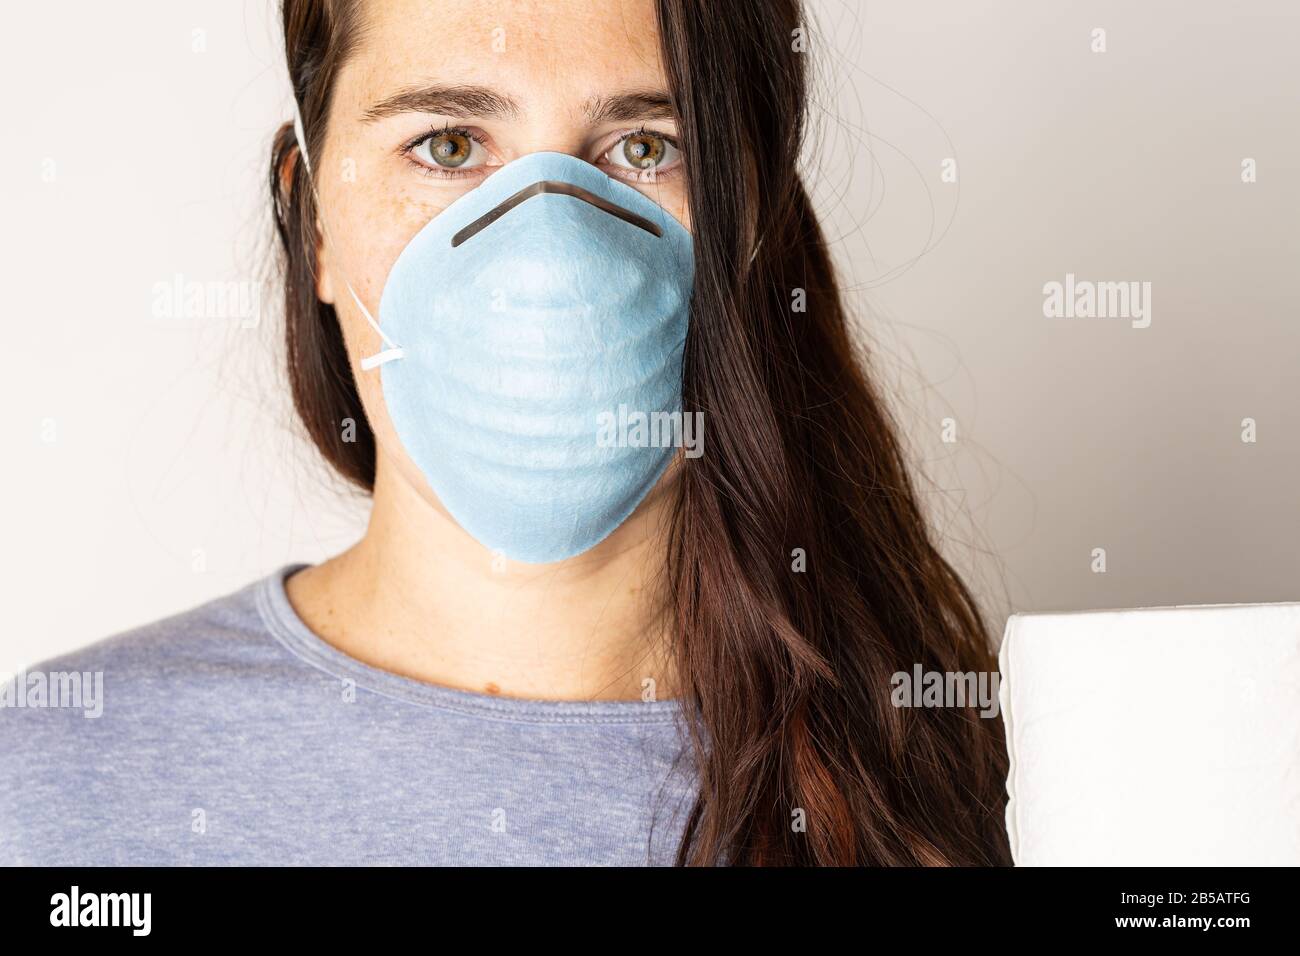 A woman is wearing a face mask for protection from the Corona Virus and has stocked up on her toilet paper stash in case of quarantine. Stock Photo